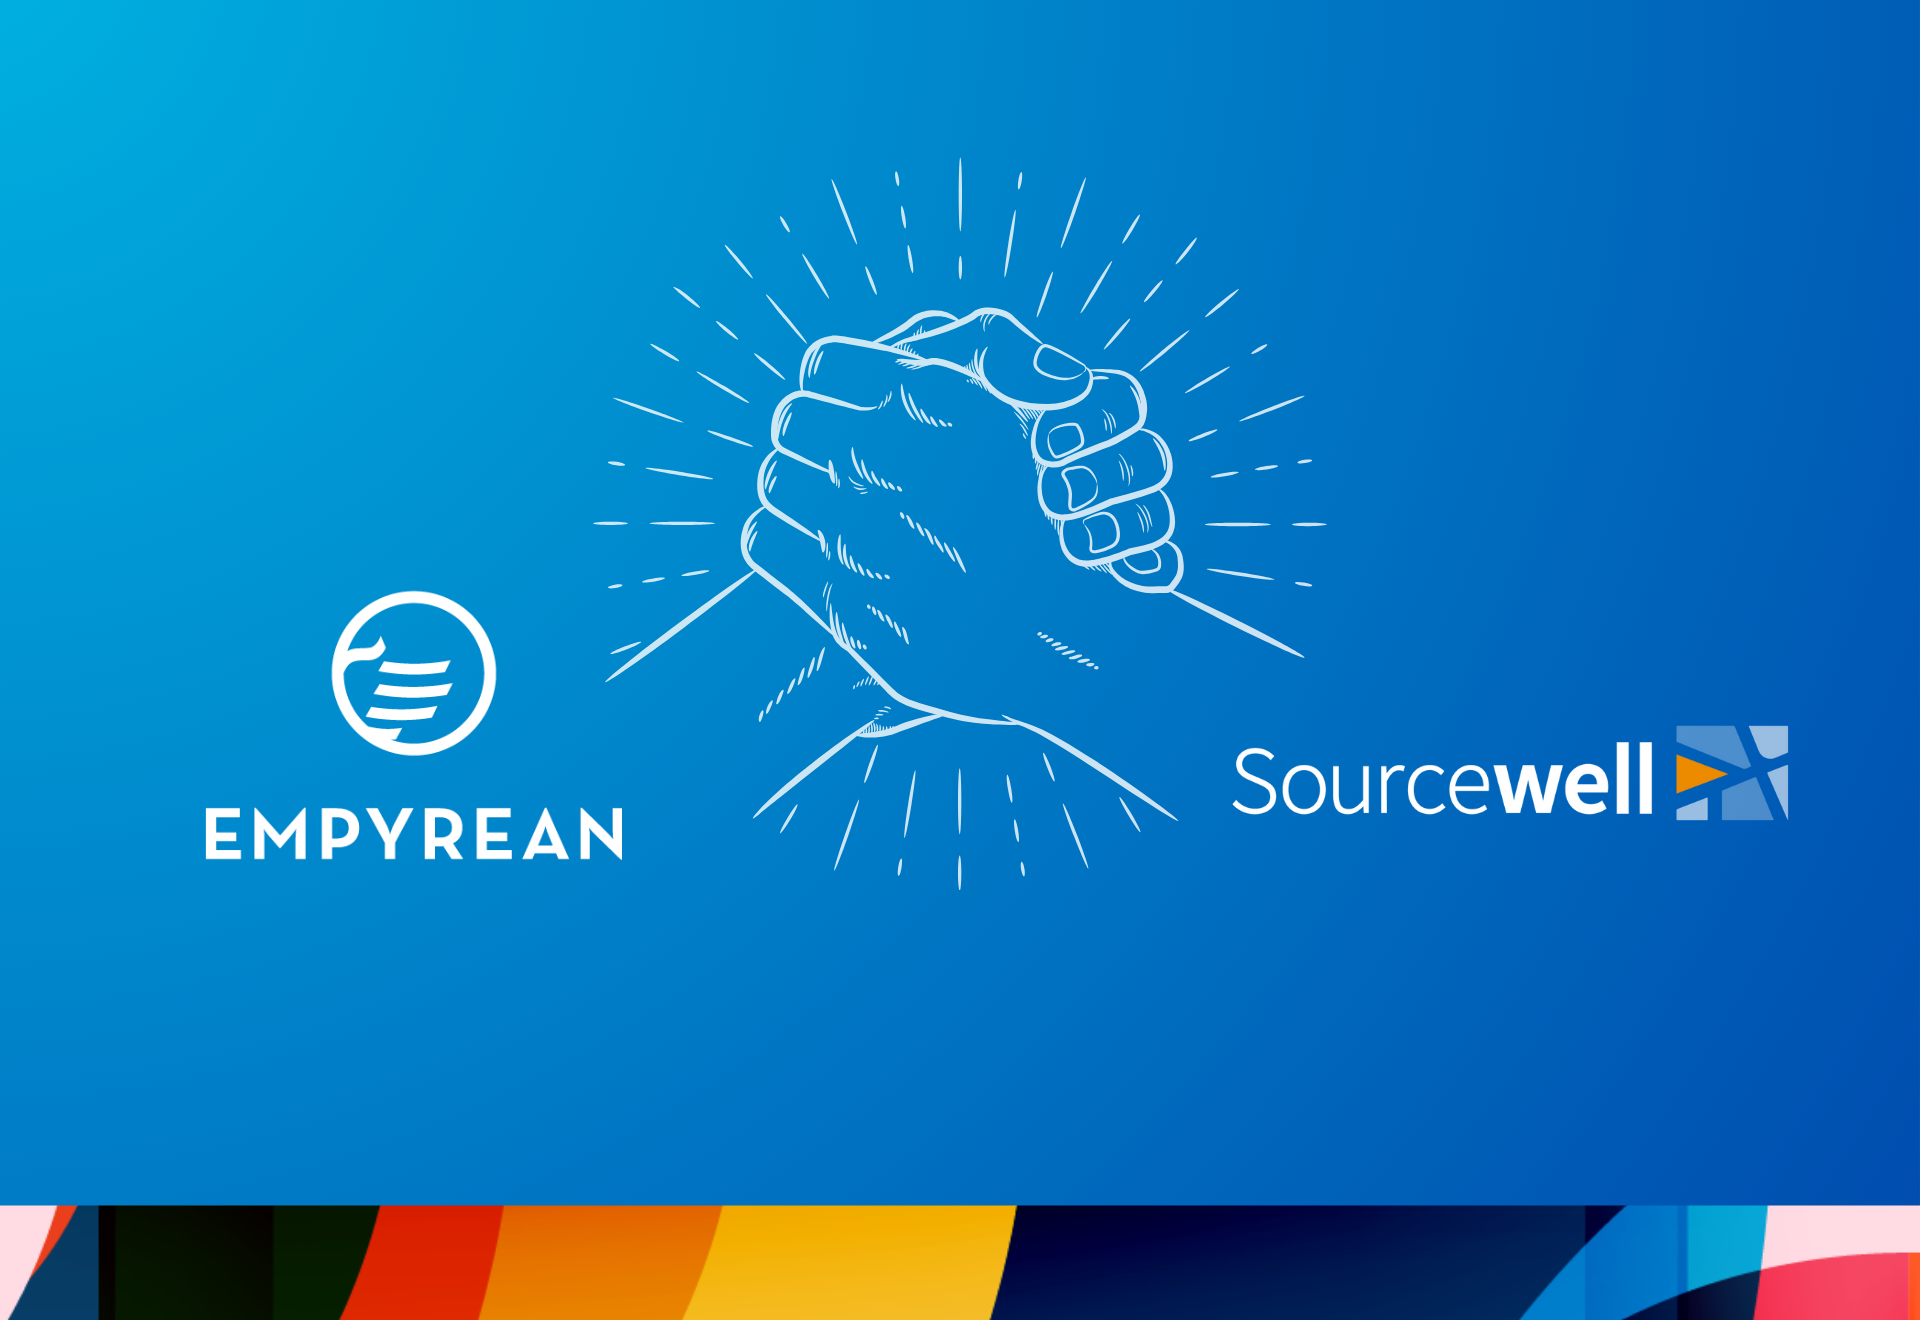 Empowering Public Sector HR: Empyrean’s New Partnership with Sourcewell